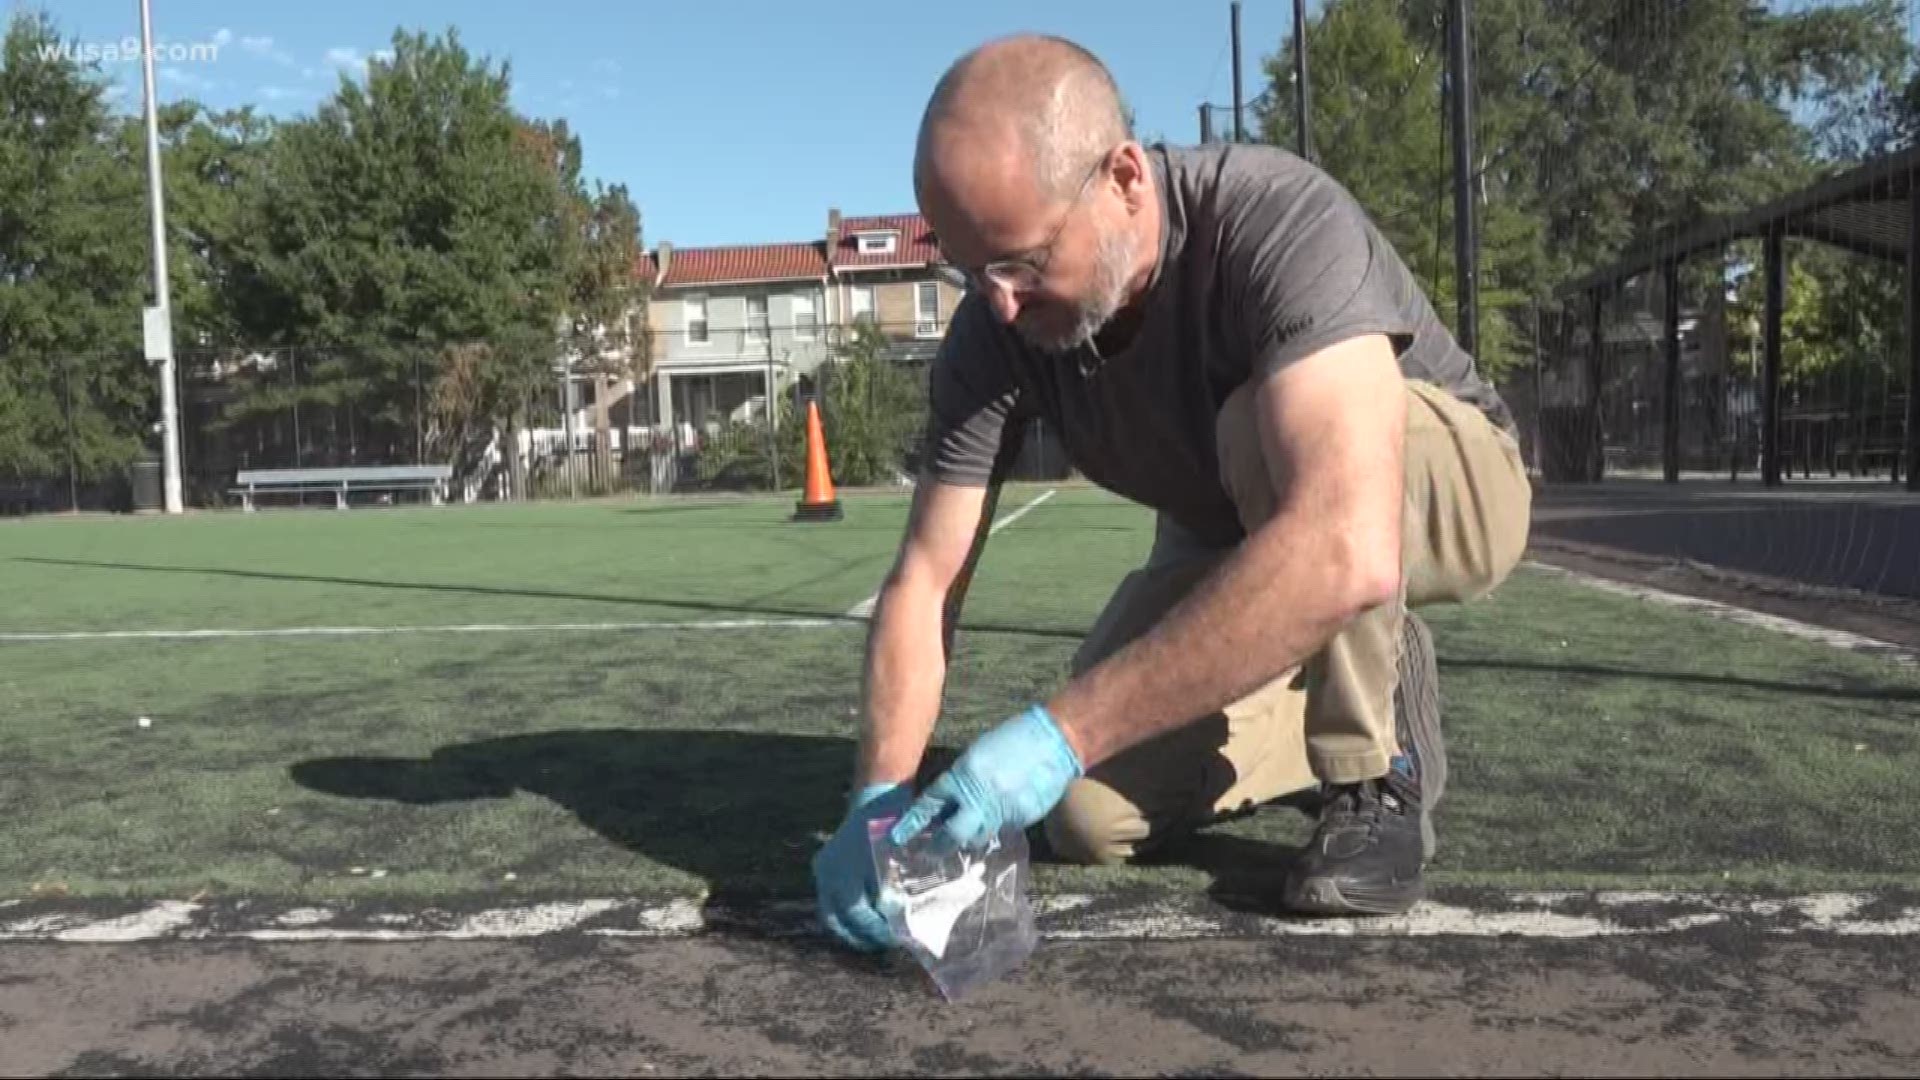 Similar tests run on Boston sports fields found PFAS chemicals often used as stain guards can cause harm once they wash into water supply.